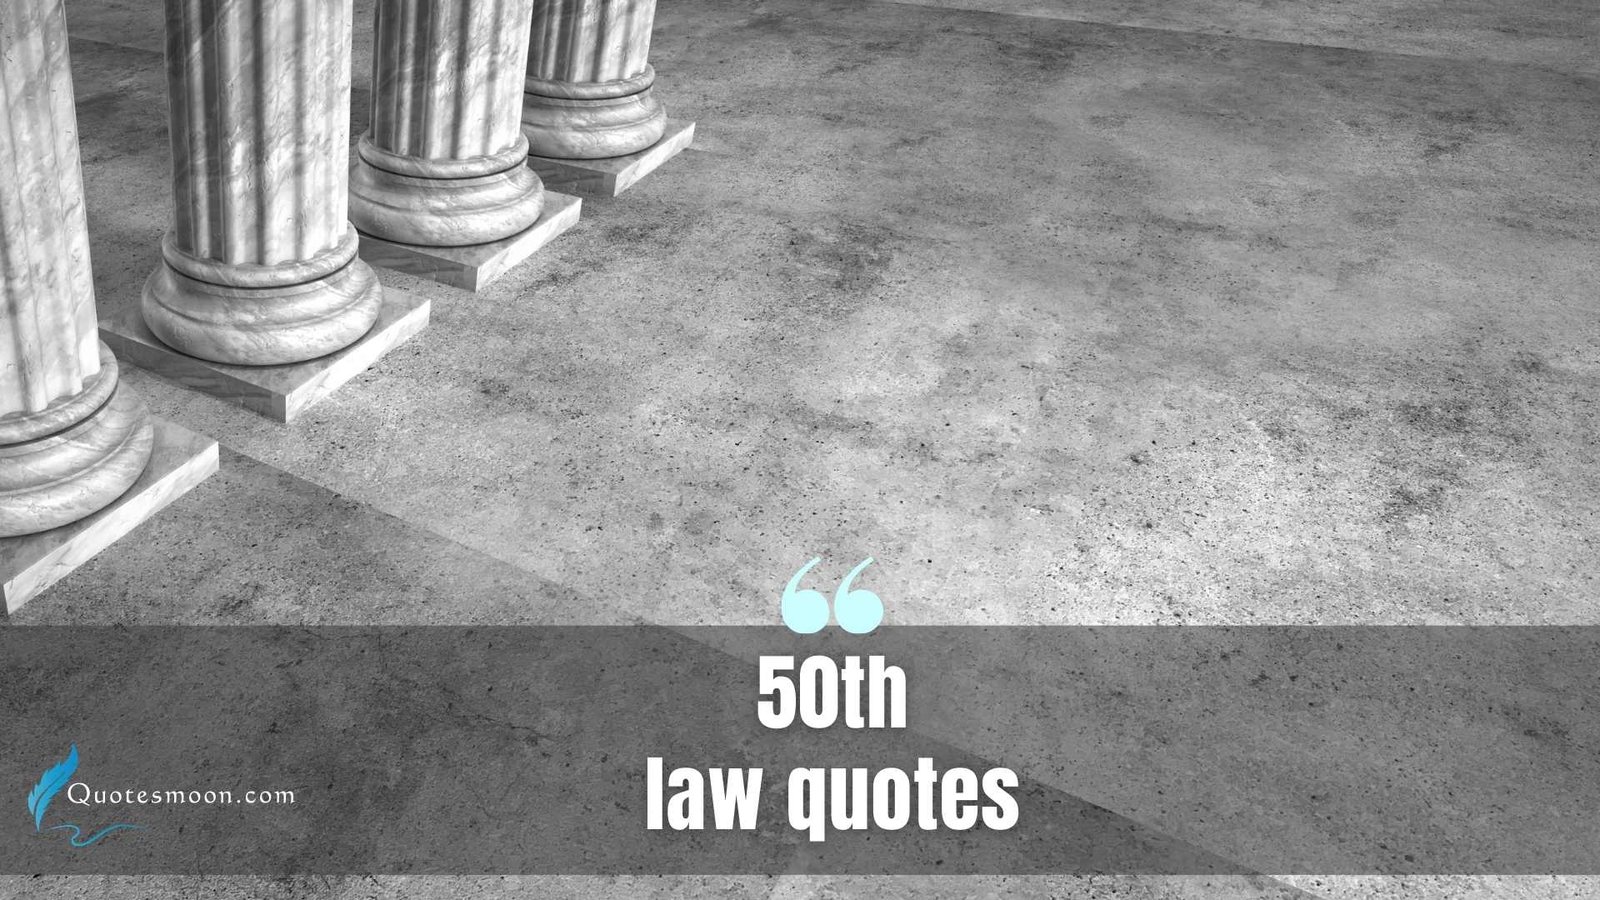 50th law quotes images